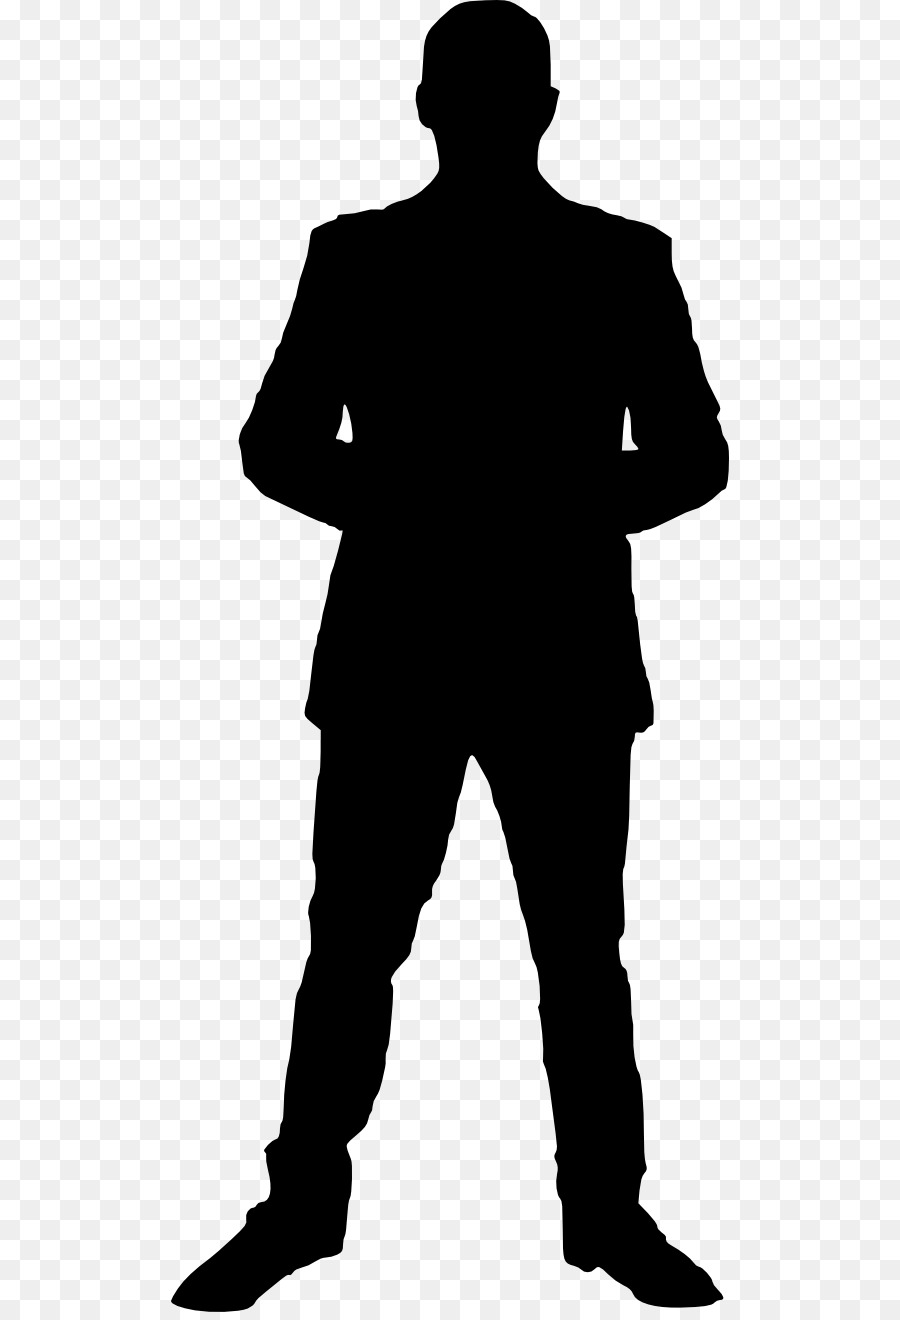 Free Silhouette Of Man Standing, Download Free Silhouette Of Man ...